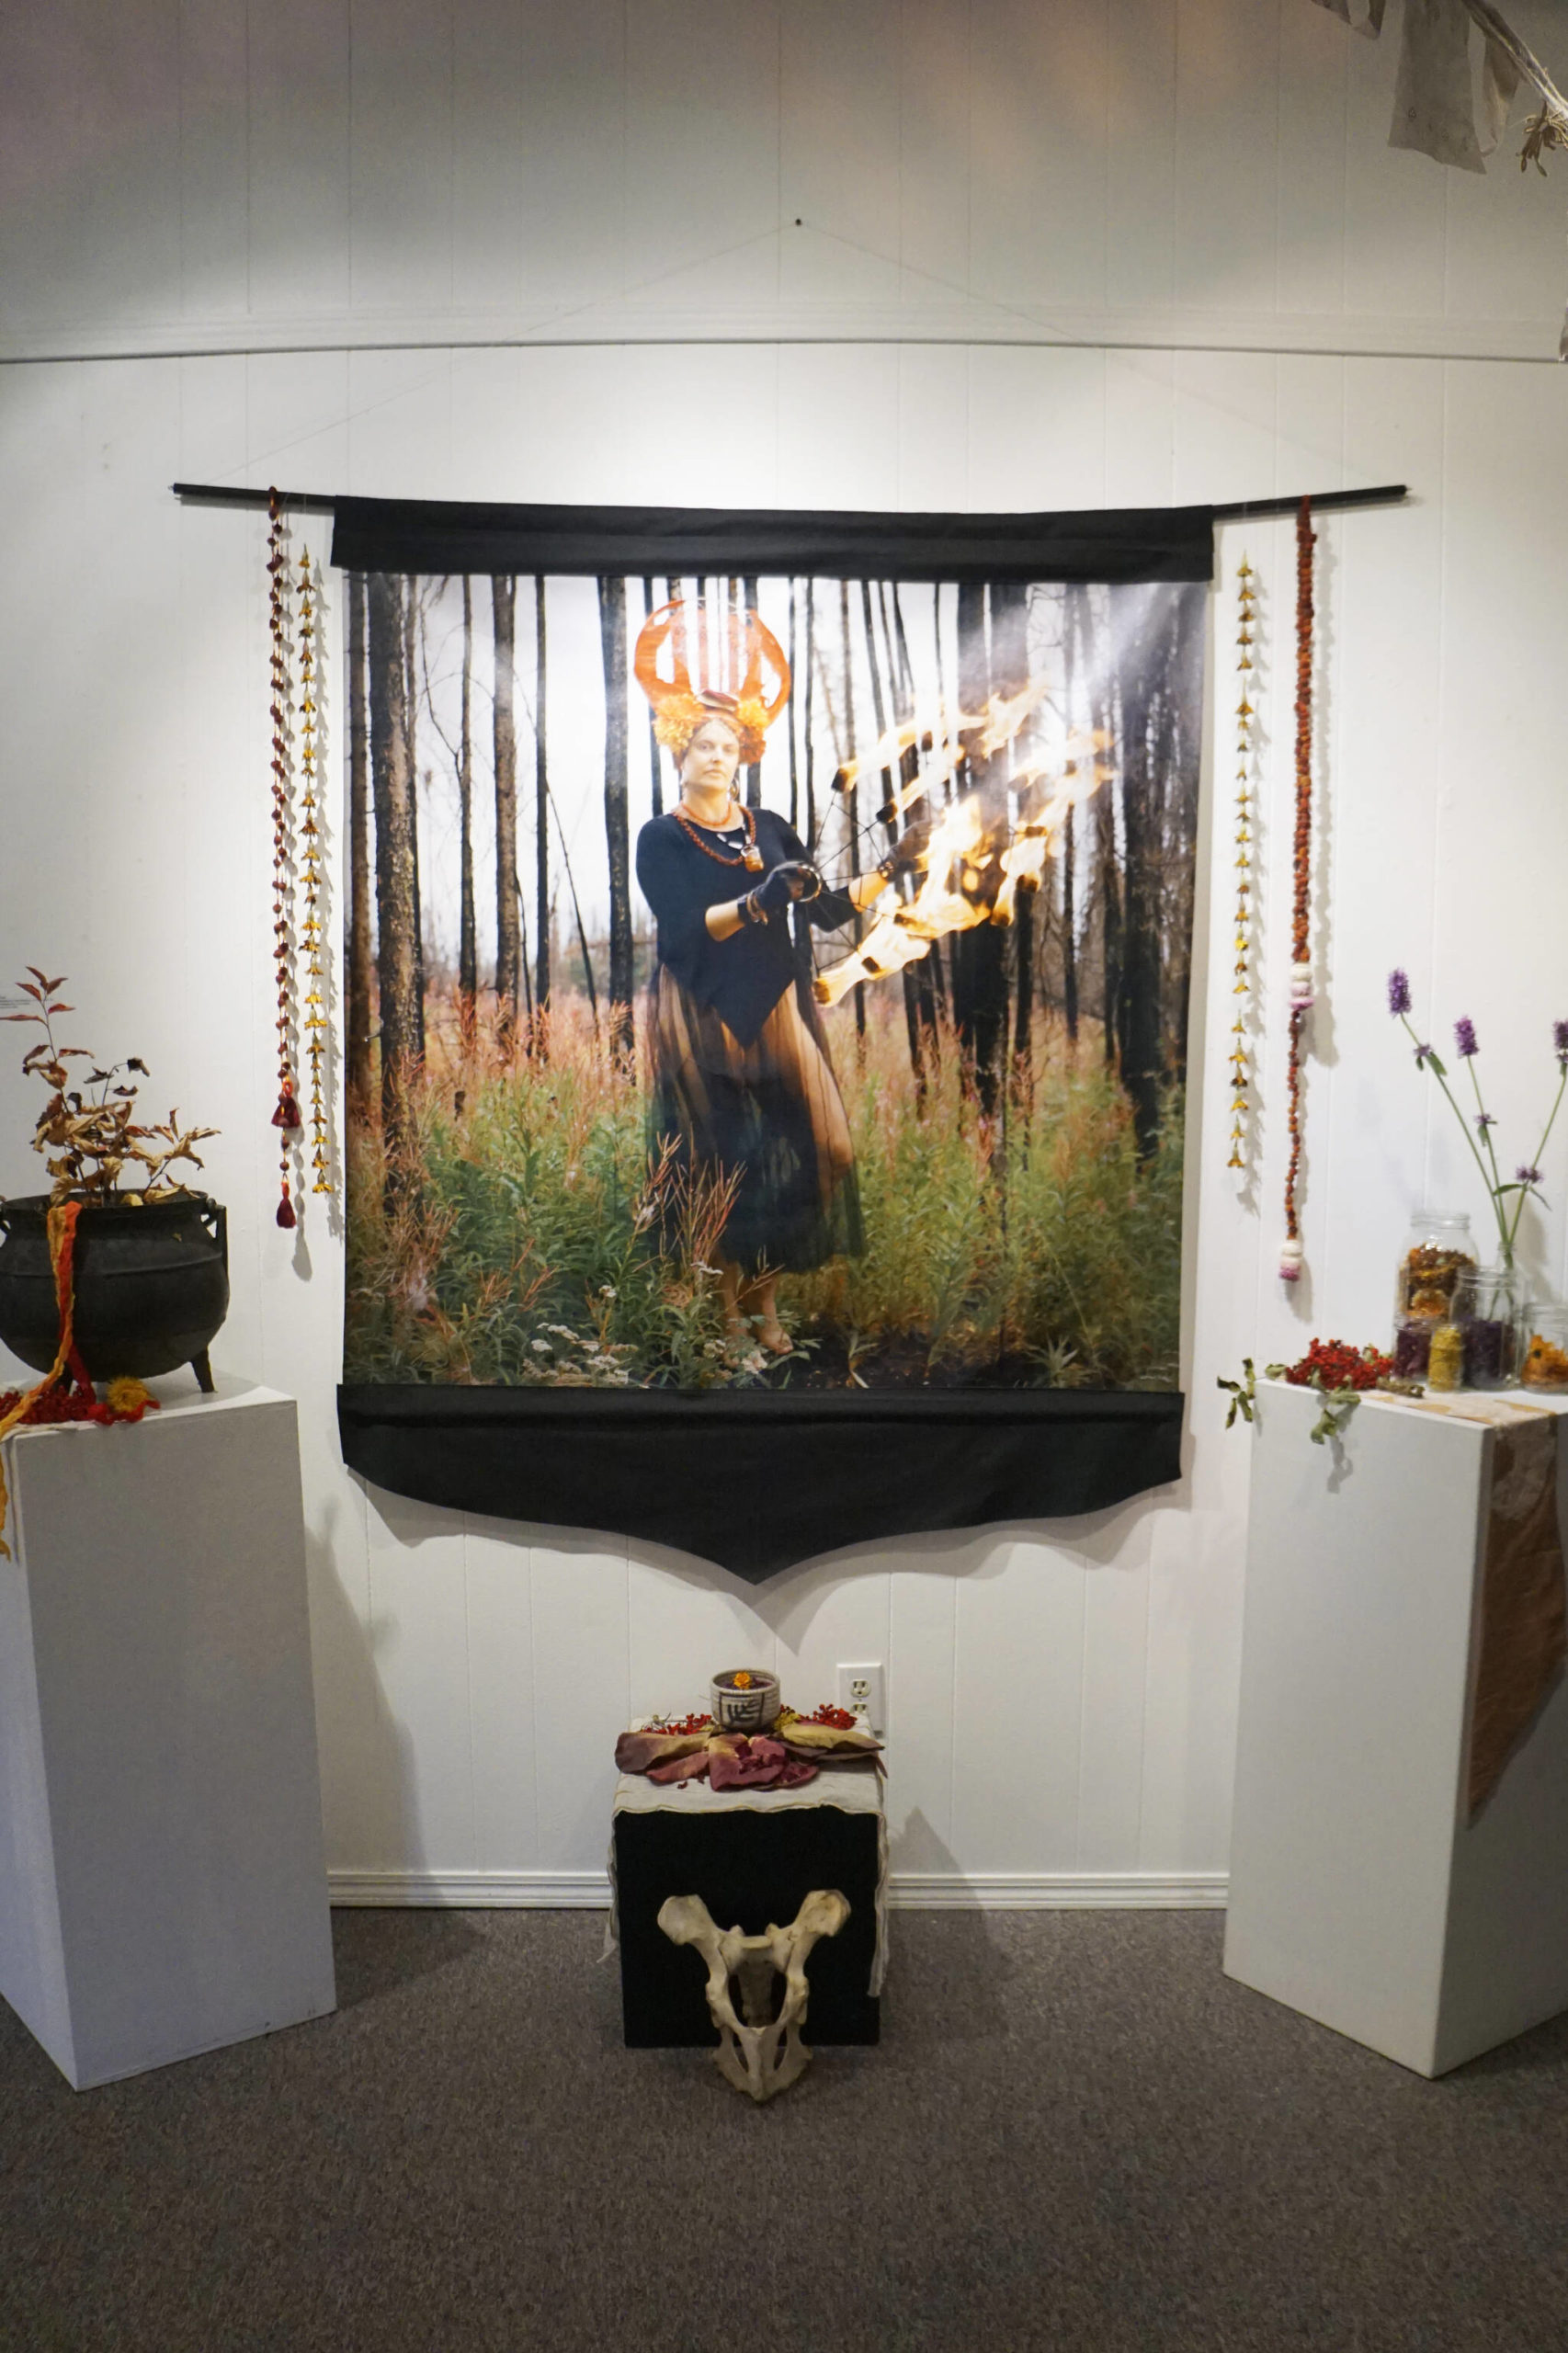 Carly Garay’s “Fire” is one of the works in her “The Art of Ancestor Veneration,” on display through Oct. 30, 2021, at the Homer Council on the Arts in Homer, Alaska. (Photo by Michael Armstrong/Homer News)